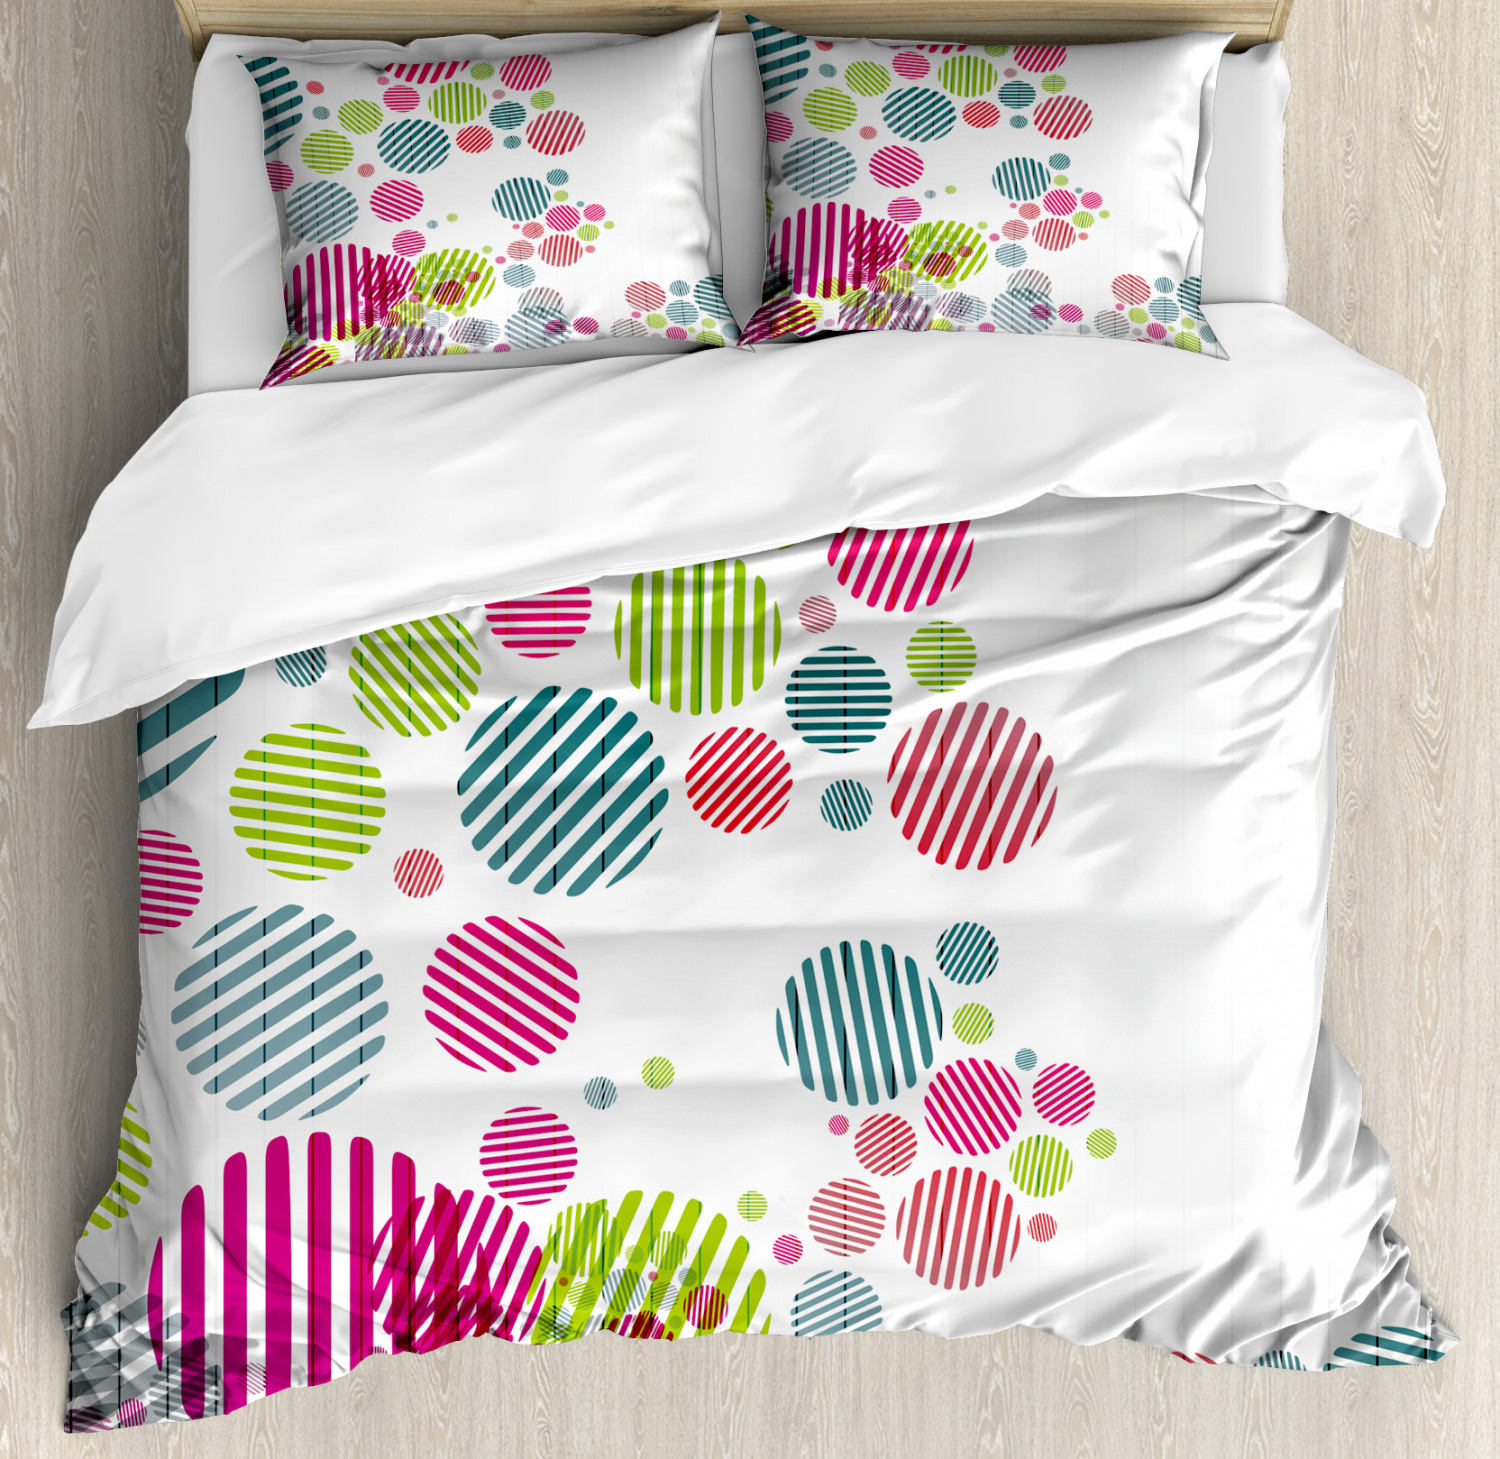 Colorful Duvet Cover Set with Pillow Shams Abstract Striped Dots Print ...